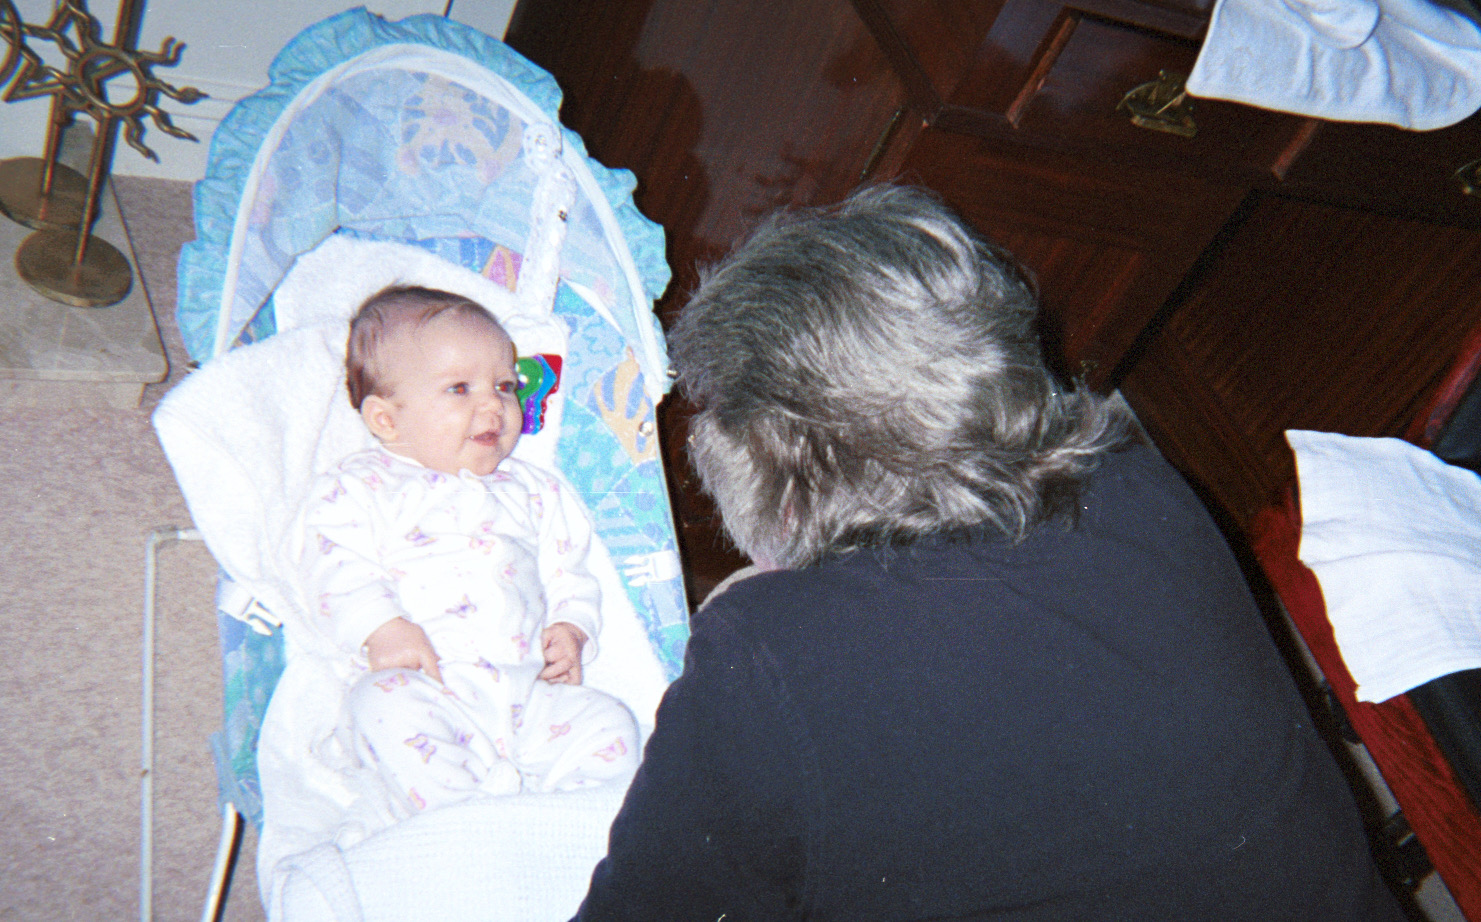 Grandma Mary Lou on first visit to meet first grandchild, Natalie. UK December 2000